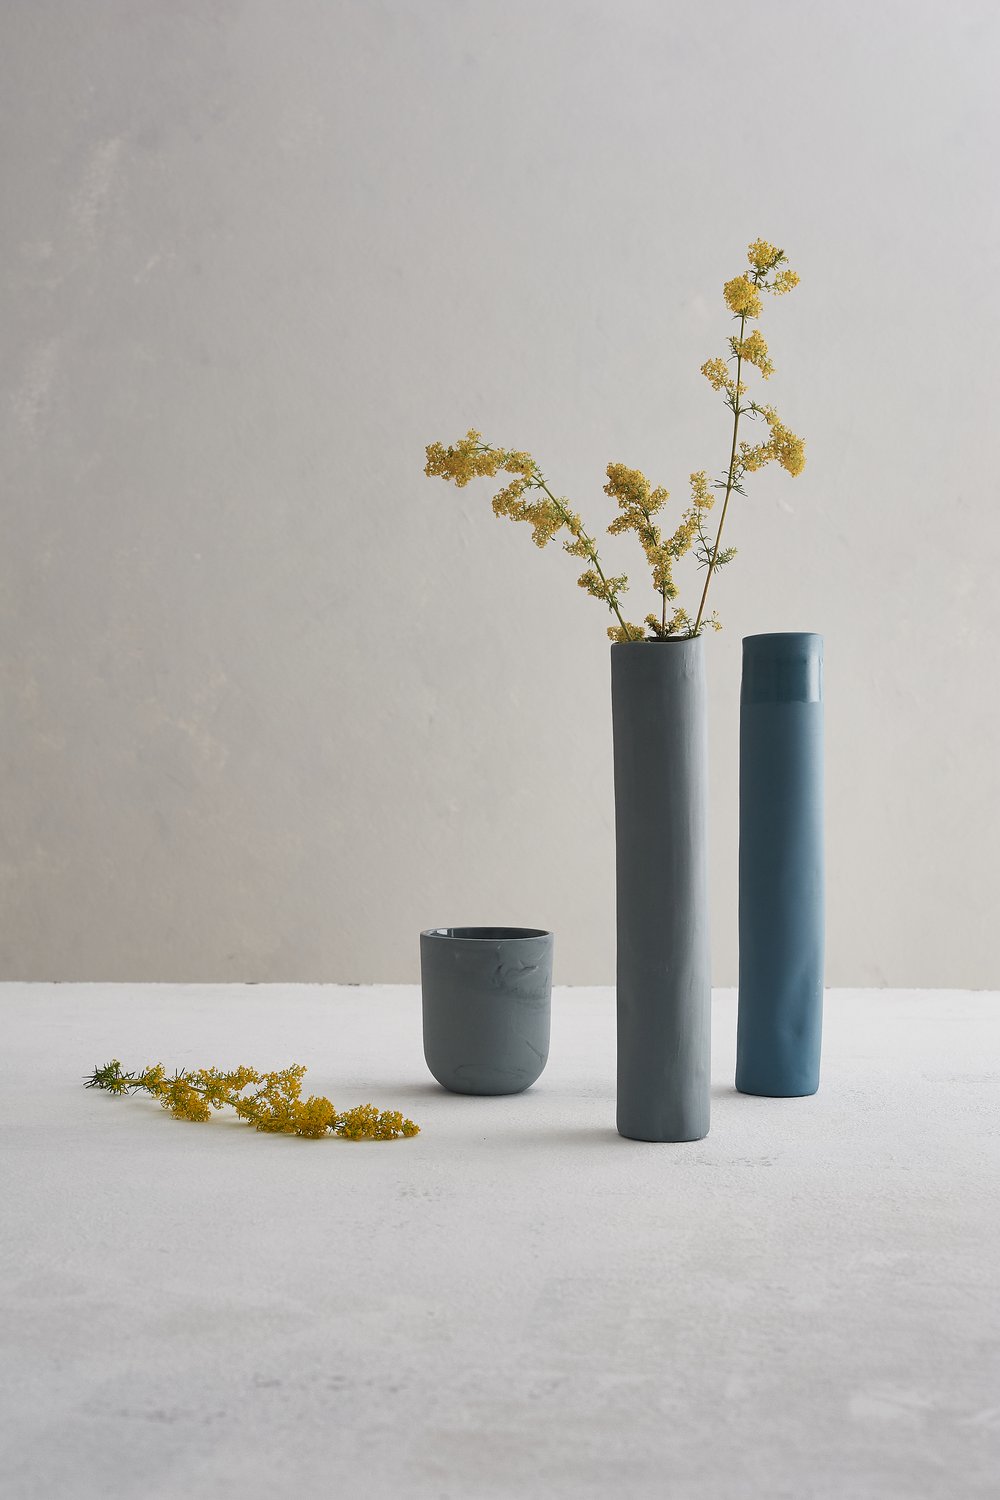  Still life image of handmade ceramic vases and beaker photographed on hand lightly textured and painted surface and background 